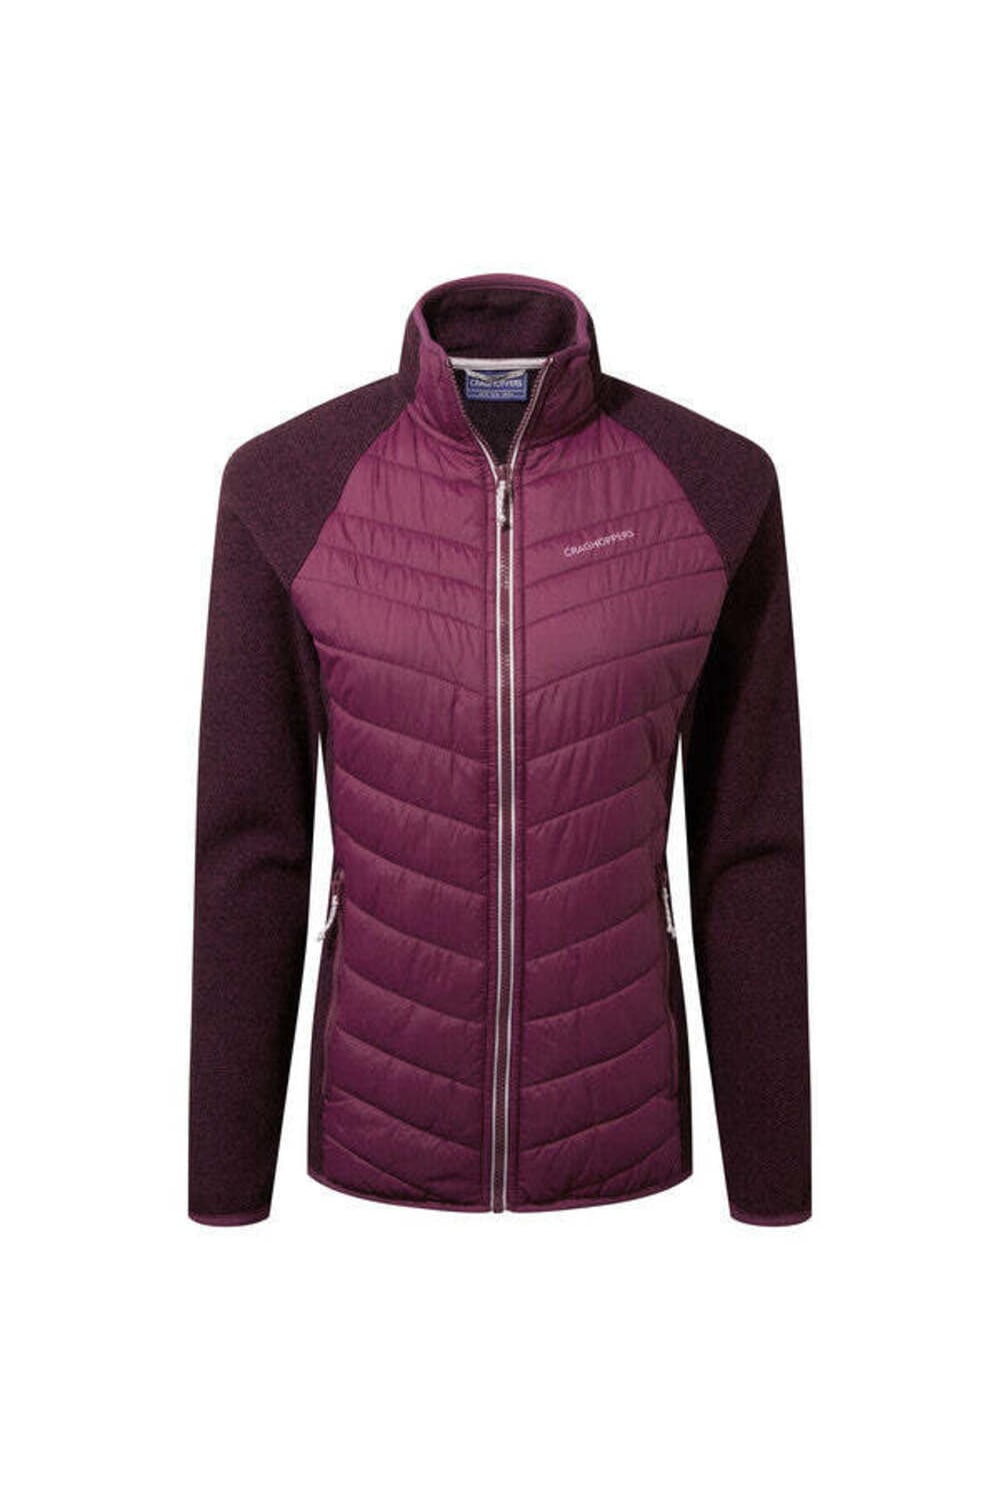 Craghoppers Womens/Ladies Cary Hybrid Padded Jacket